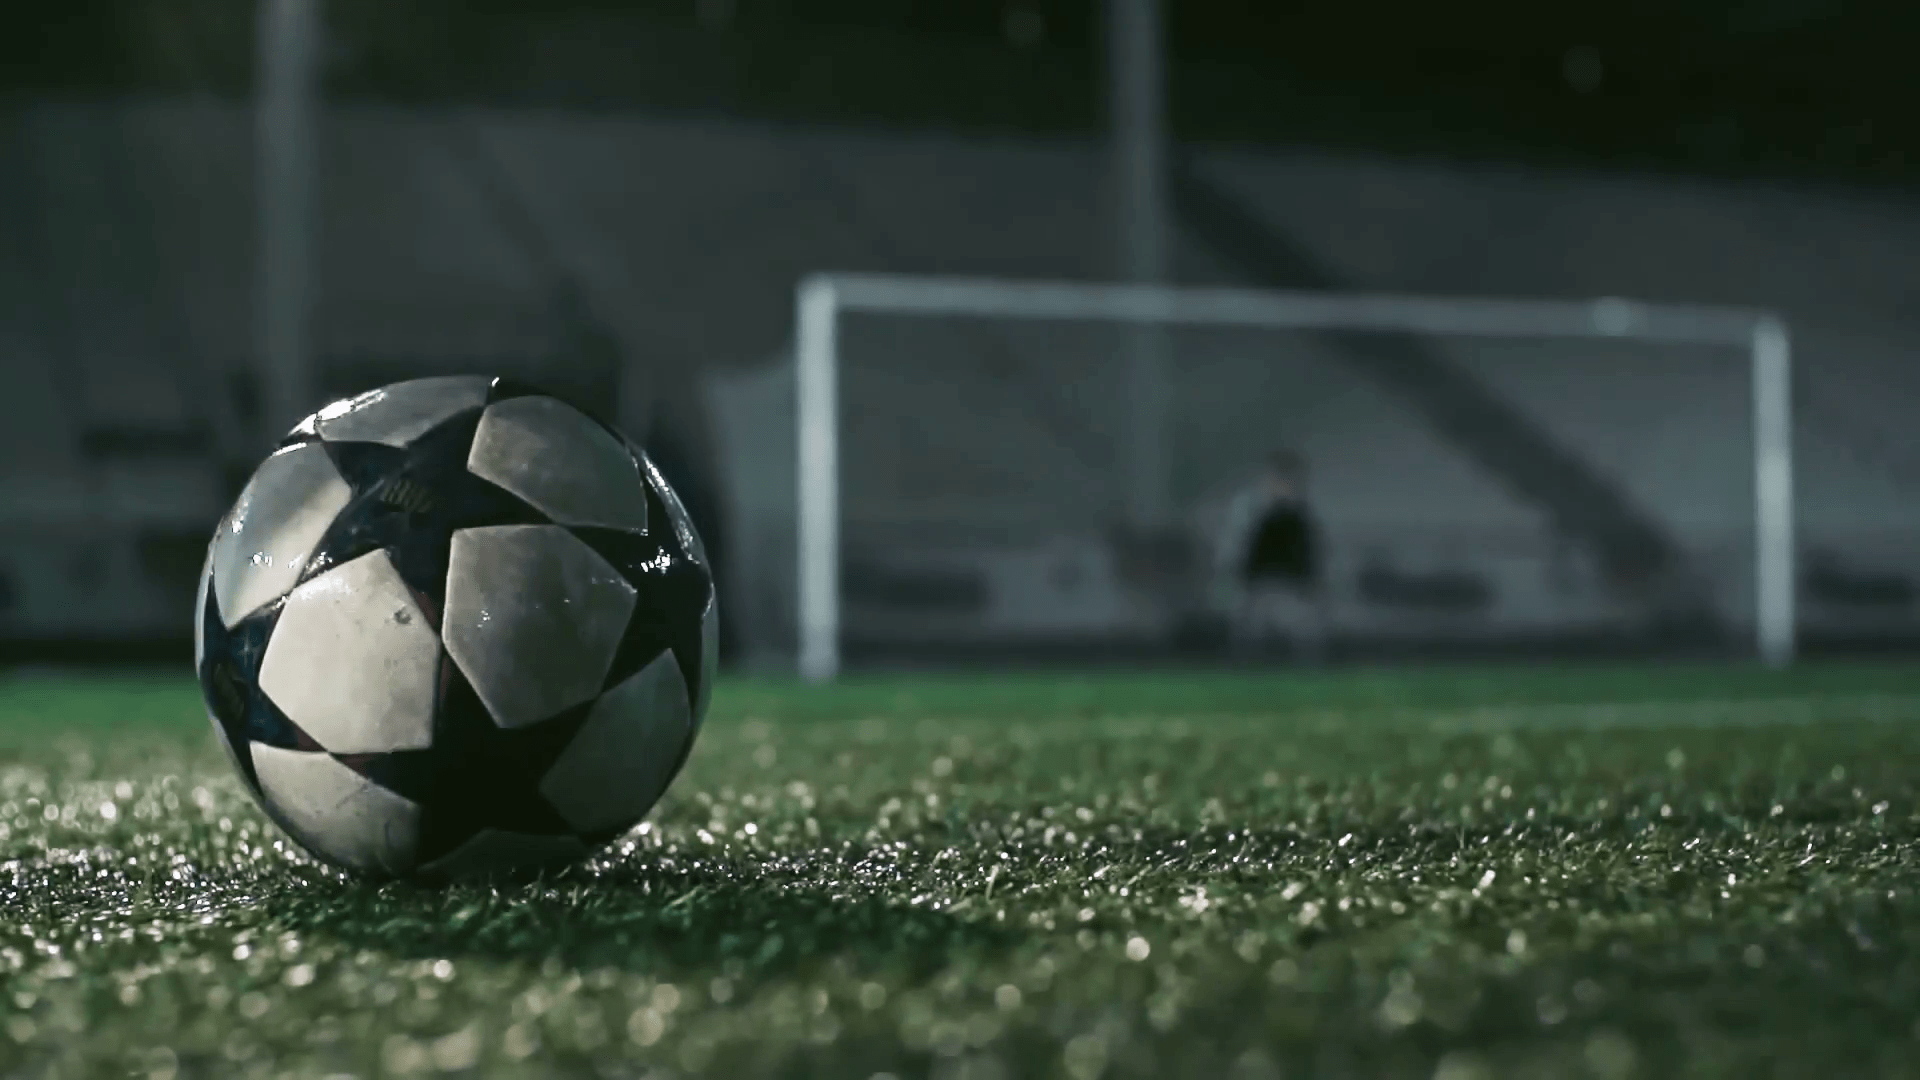 low-angle-view-of-feet-of-soccer-player-kicking-wet-ball-on-misty-grass-in-the-night-stadium-in-slow-motion_bkrpswow__f0000